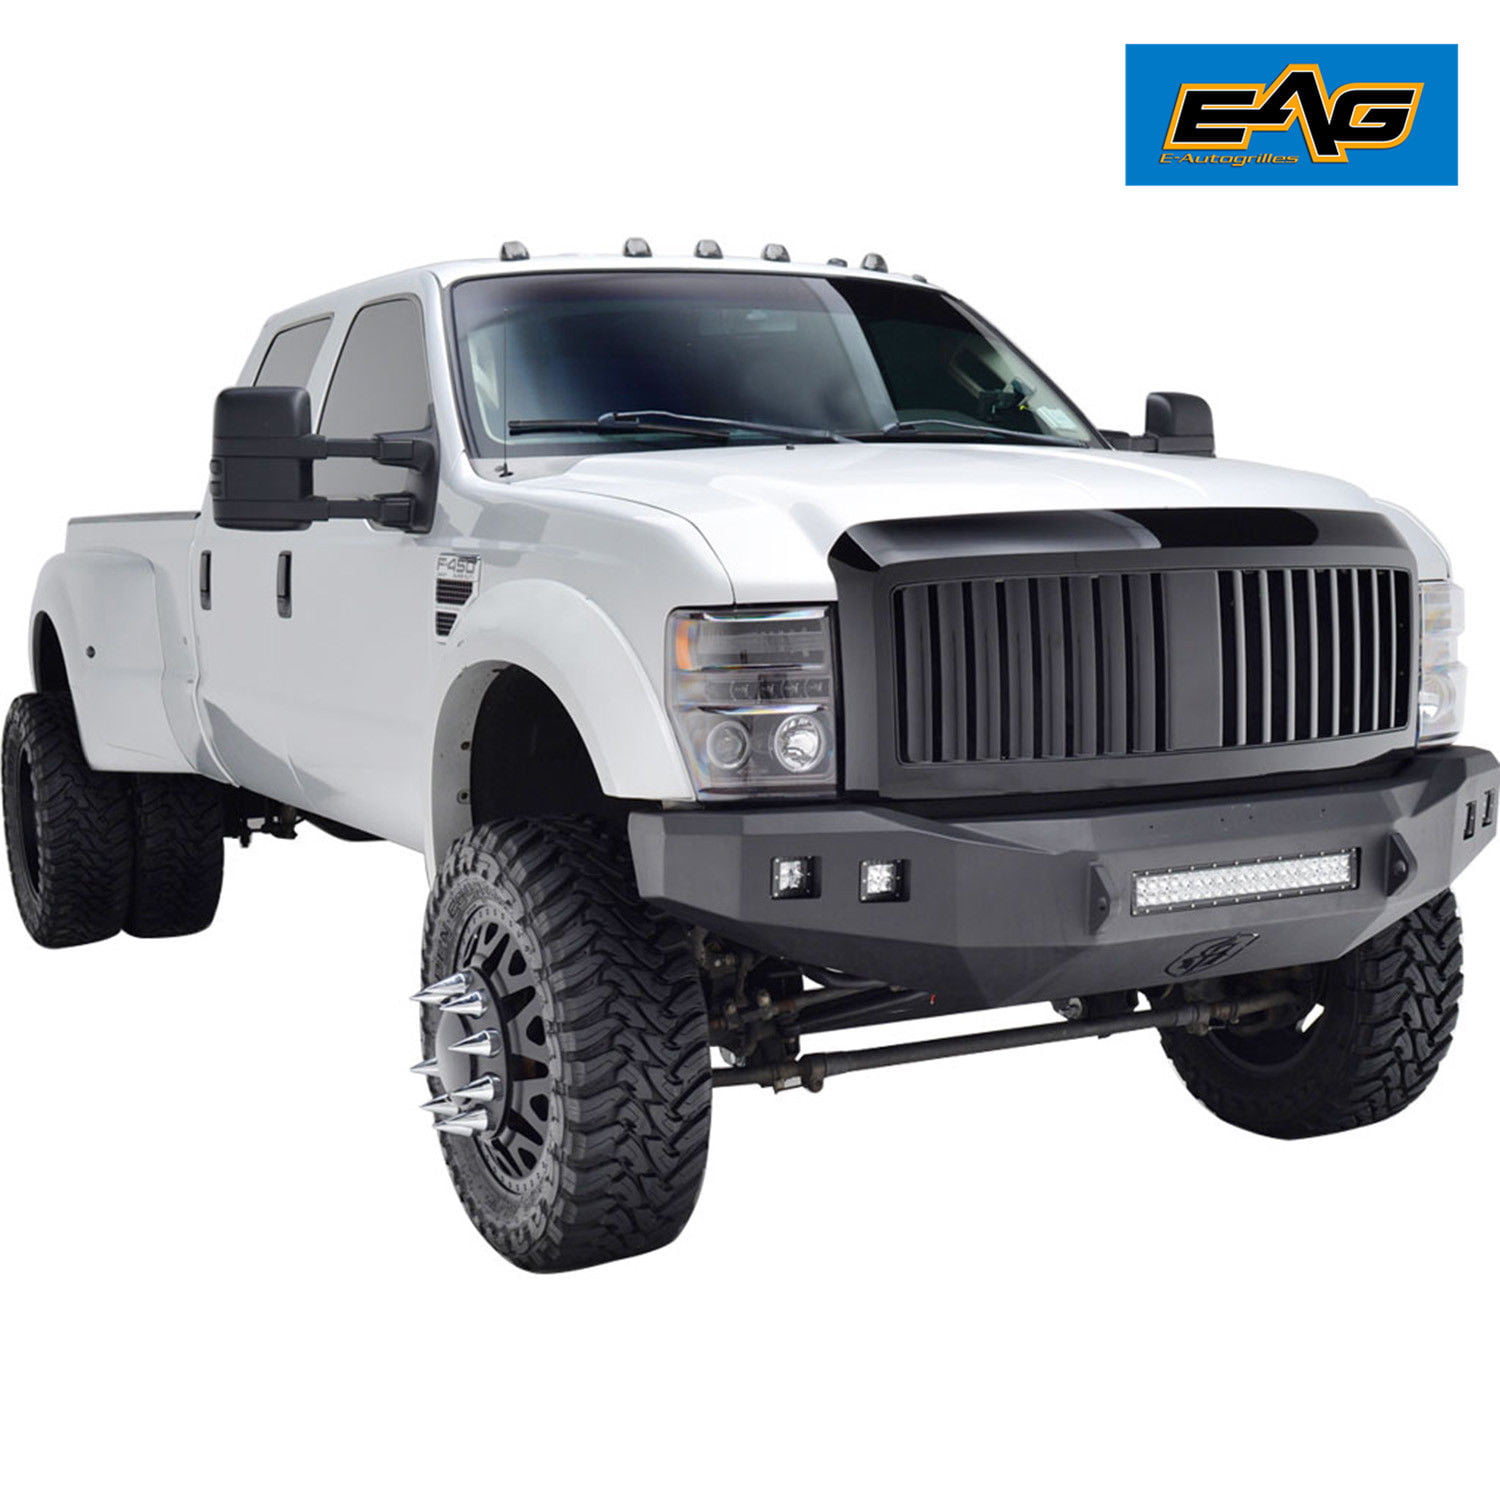 F450 F350 Topline Autopart Glossy Black Horizontal Front Hood Bumper Grill Grille ABS with Fog Lights For 99-04 Ford F250 F550 Superduty ; 00-04 Excursion 